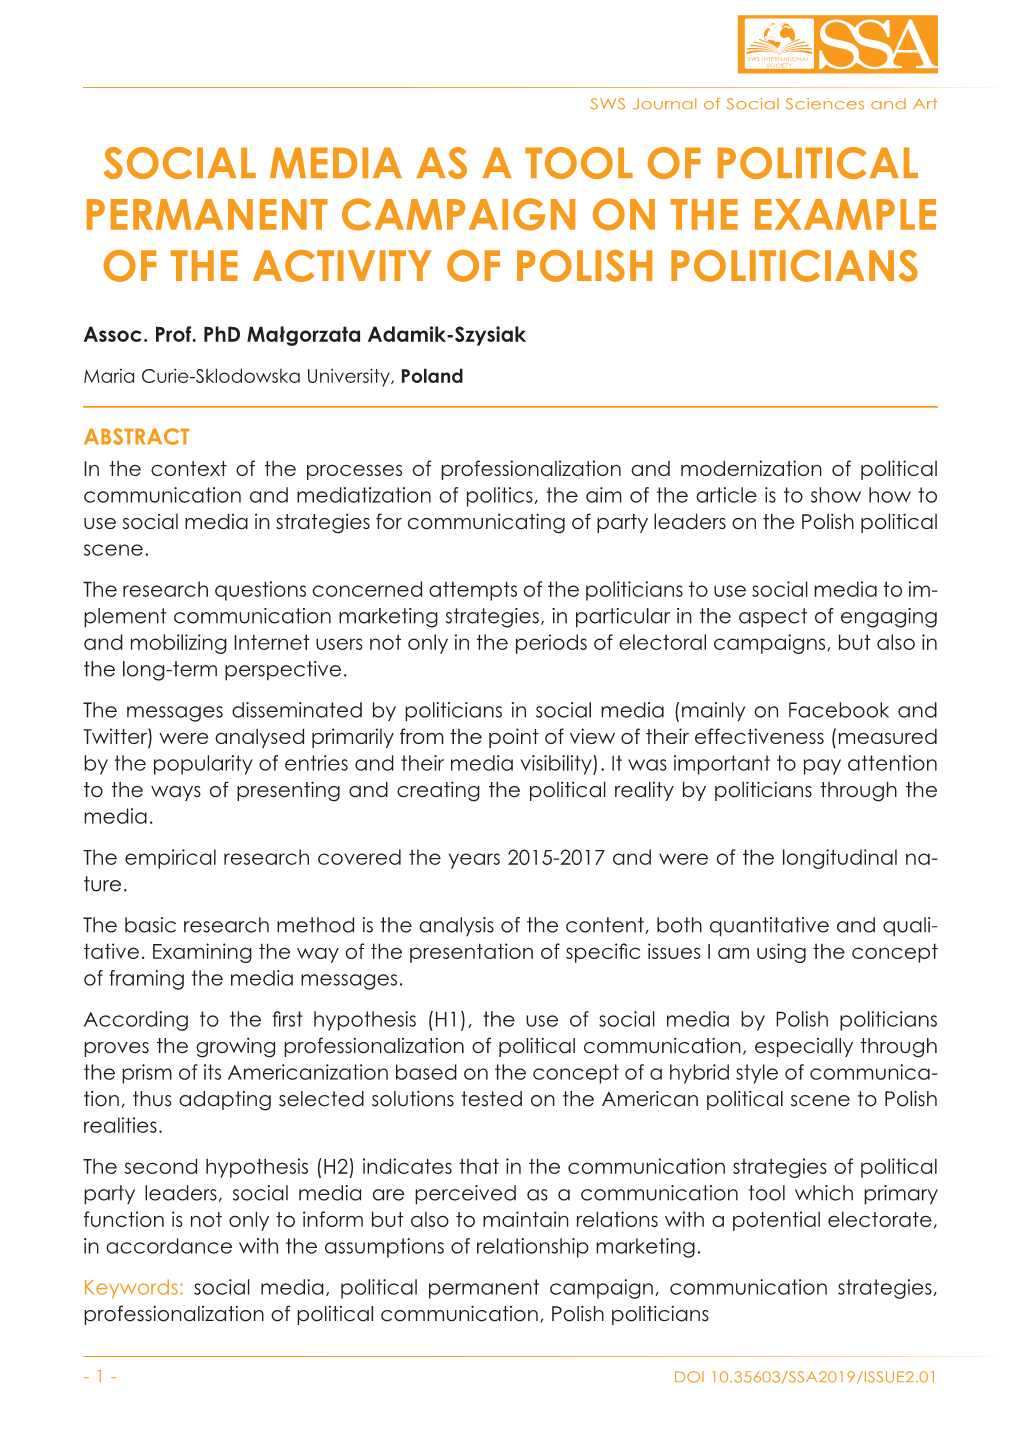 Social Media As a Tool of Political Permanent Campaign on the Example of the Activity of Polish Politicians